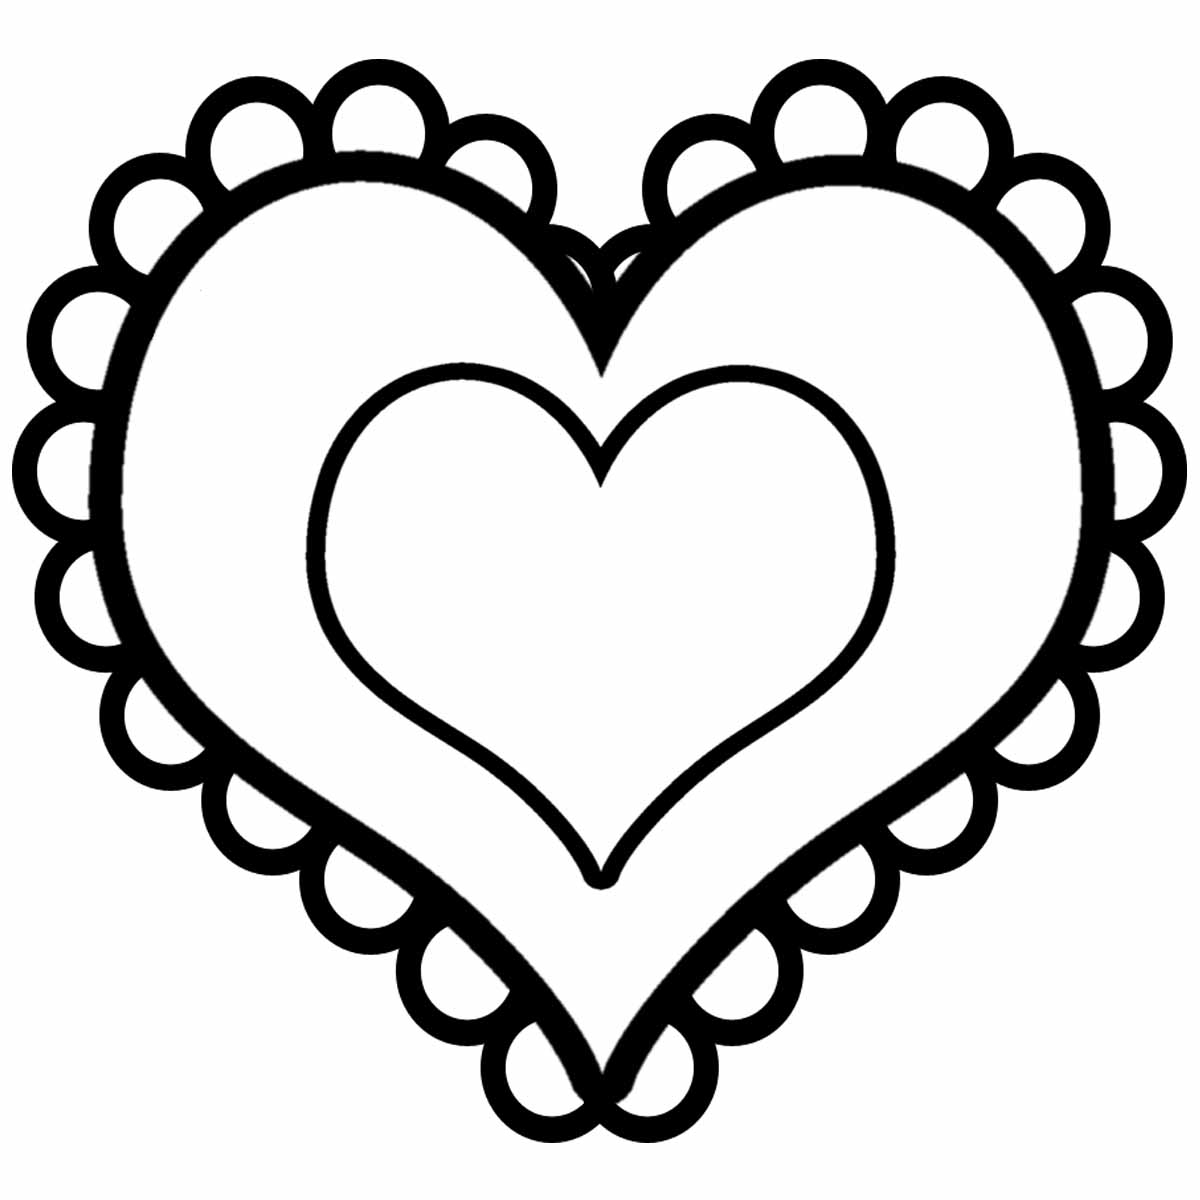 Broken Heart Clip Art Black And White Image Search Results